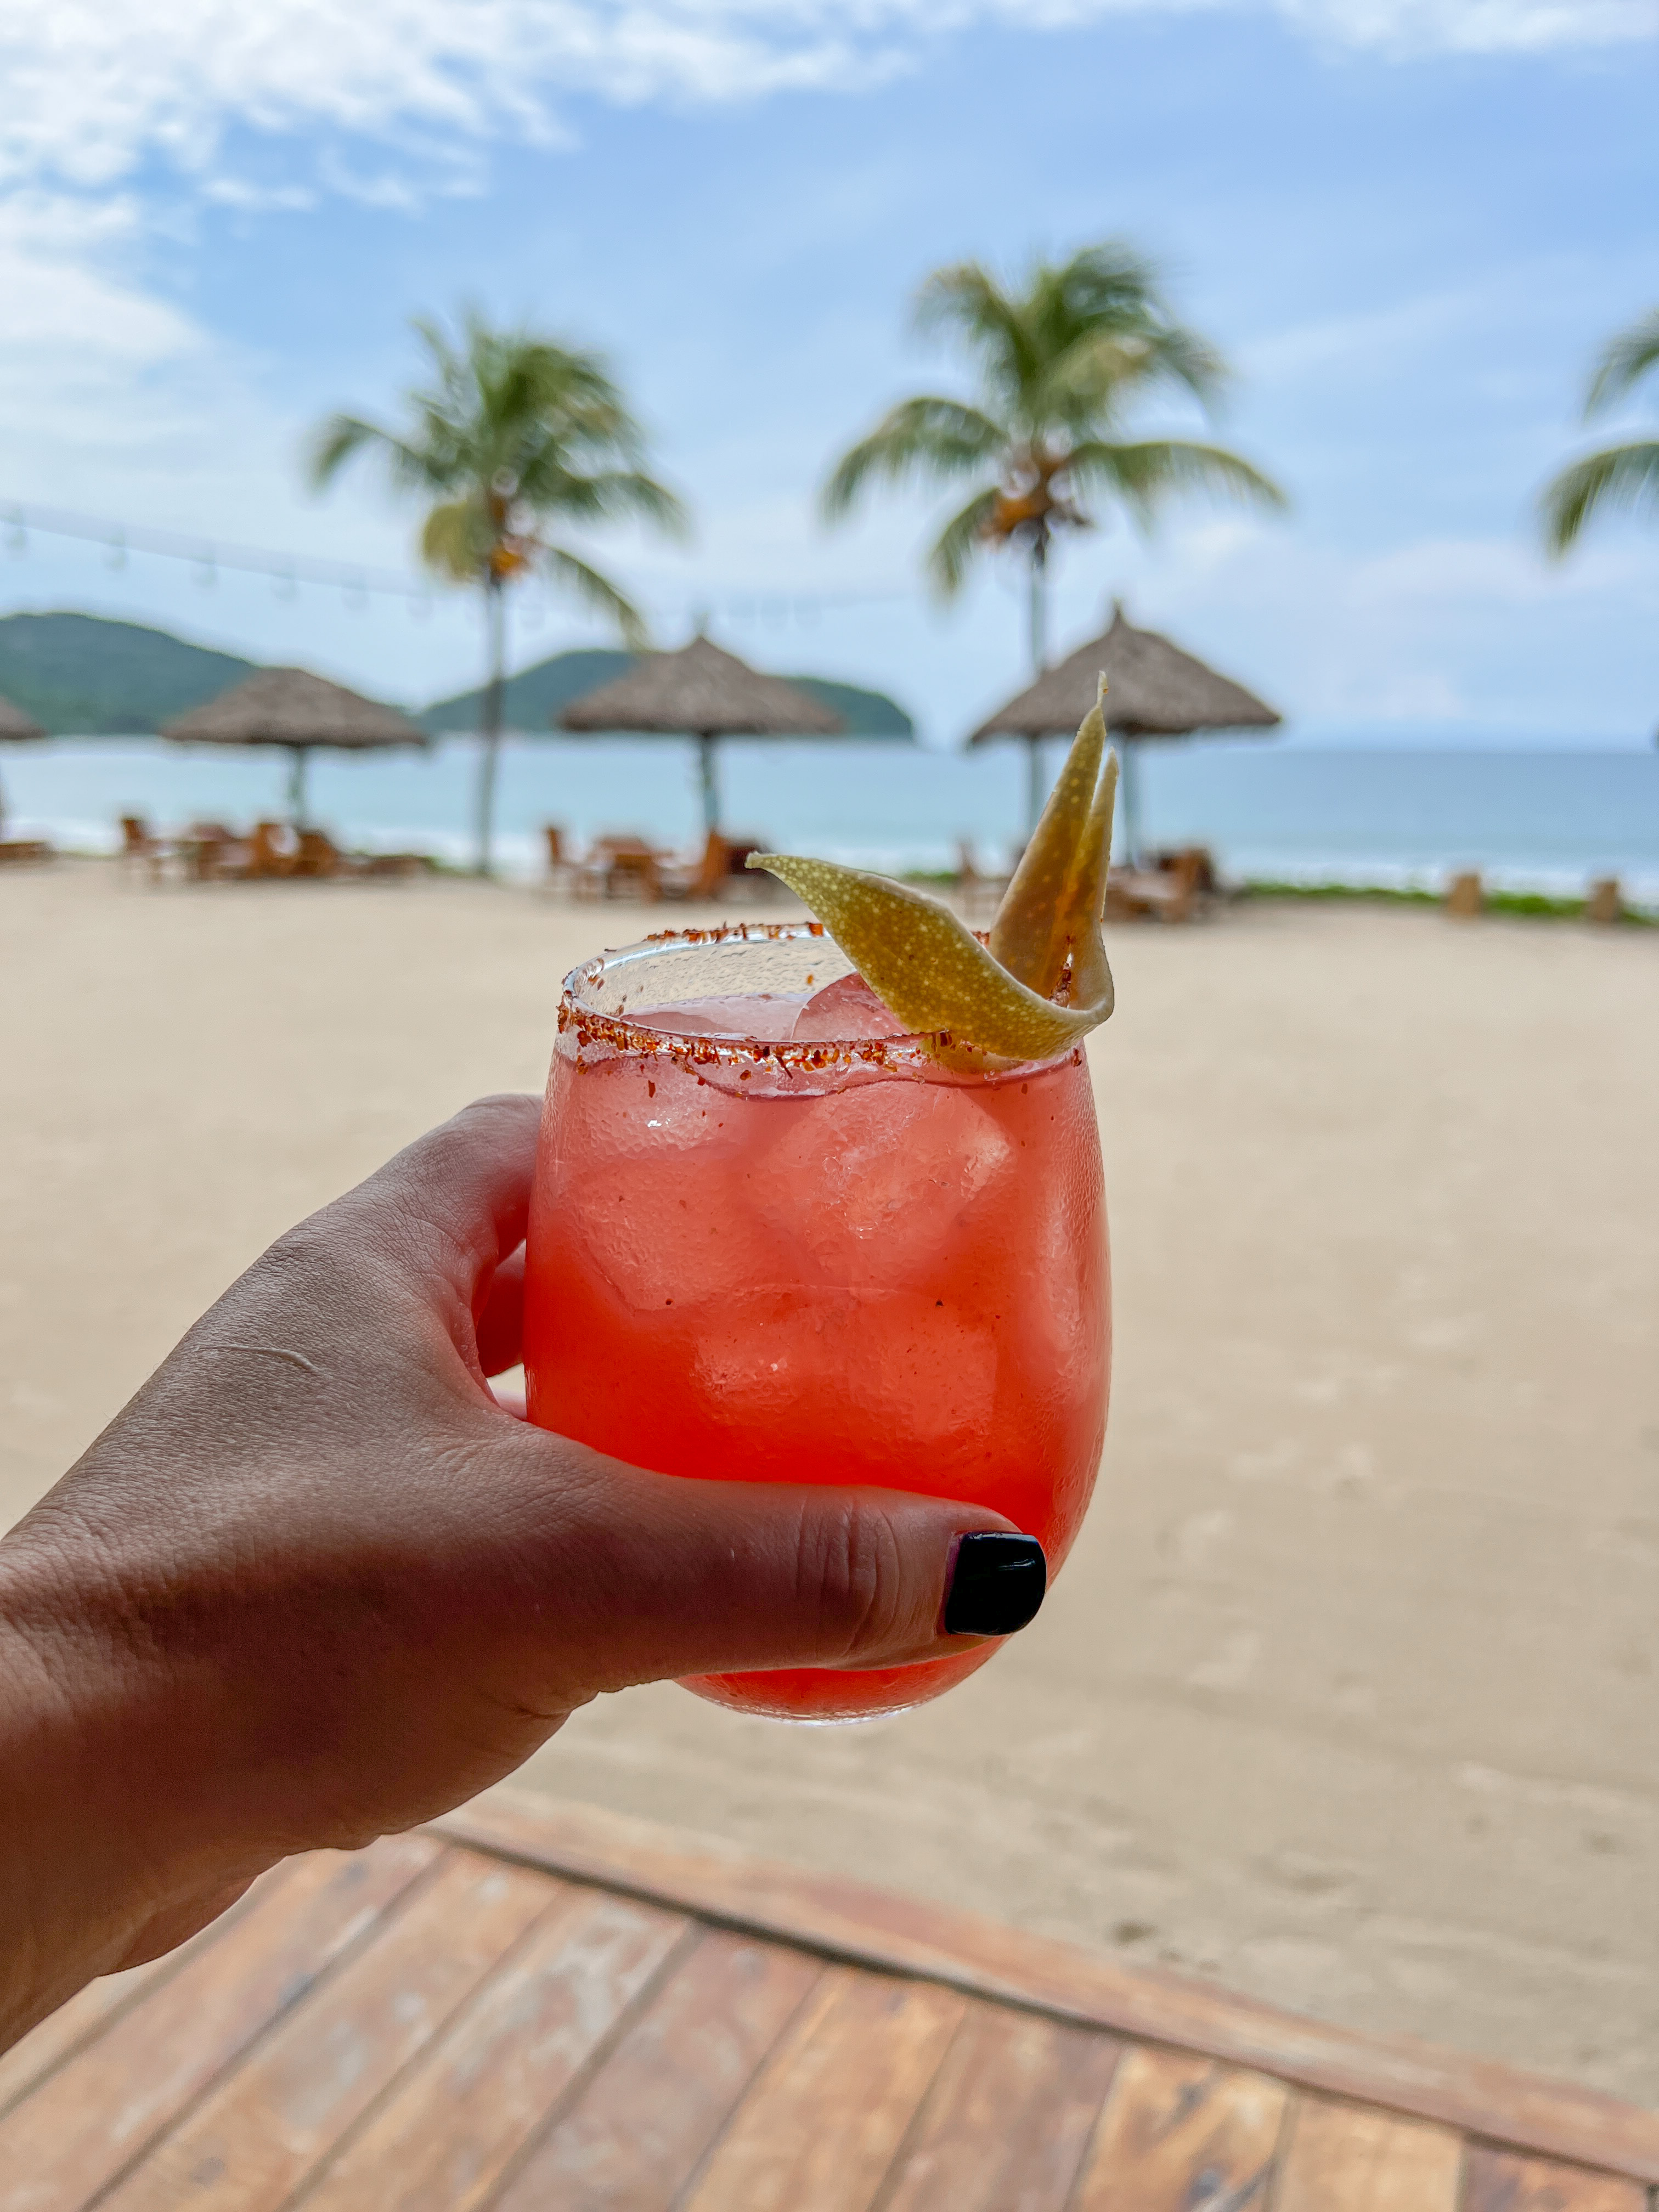 The Thompson Hotel Zihuatanejo Photo by Compass + Twine